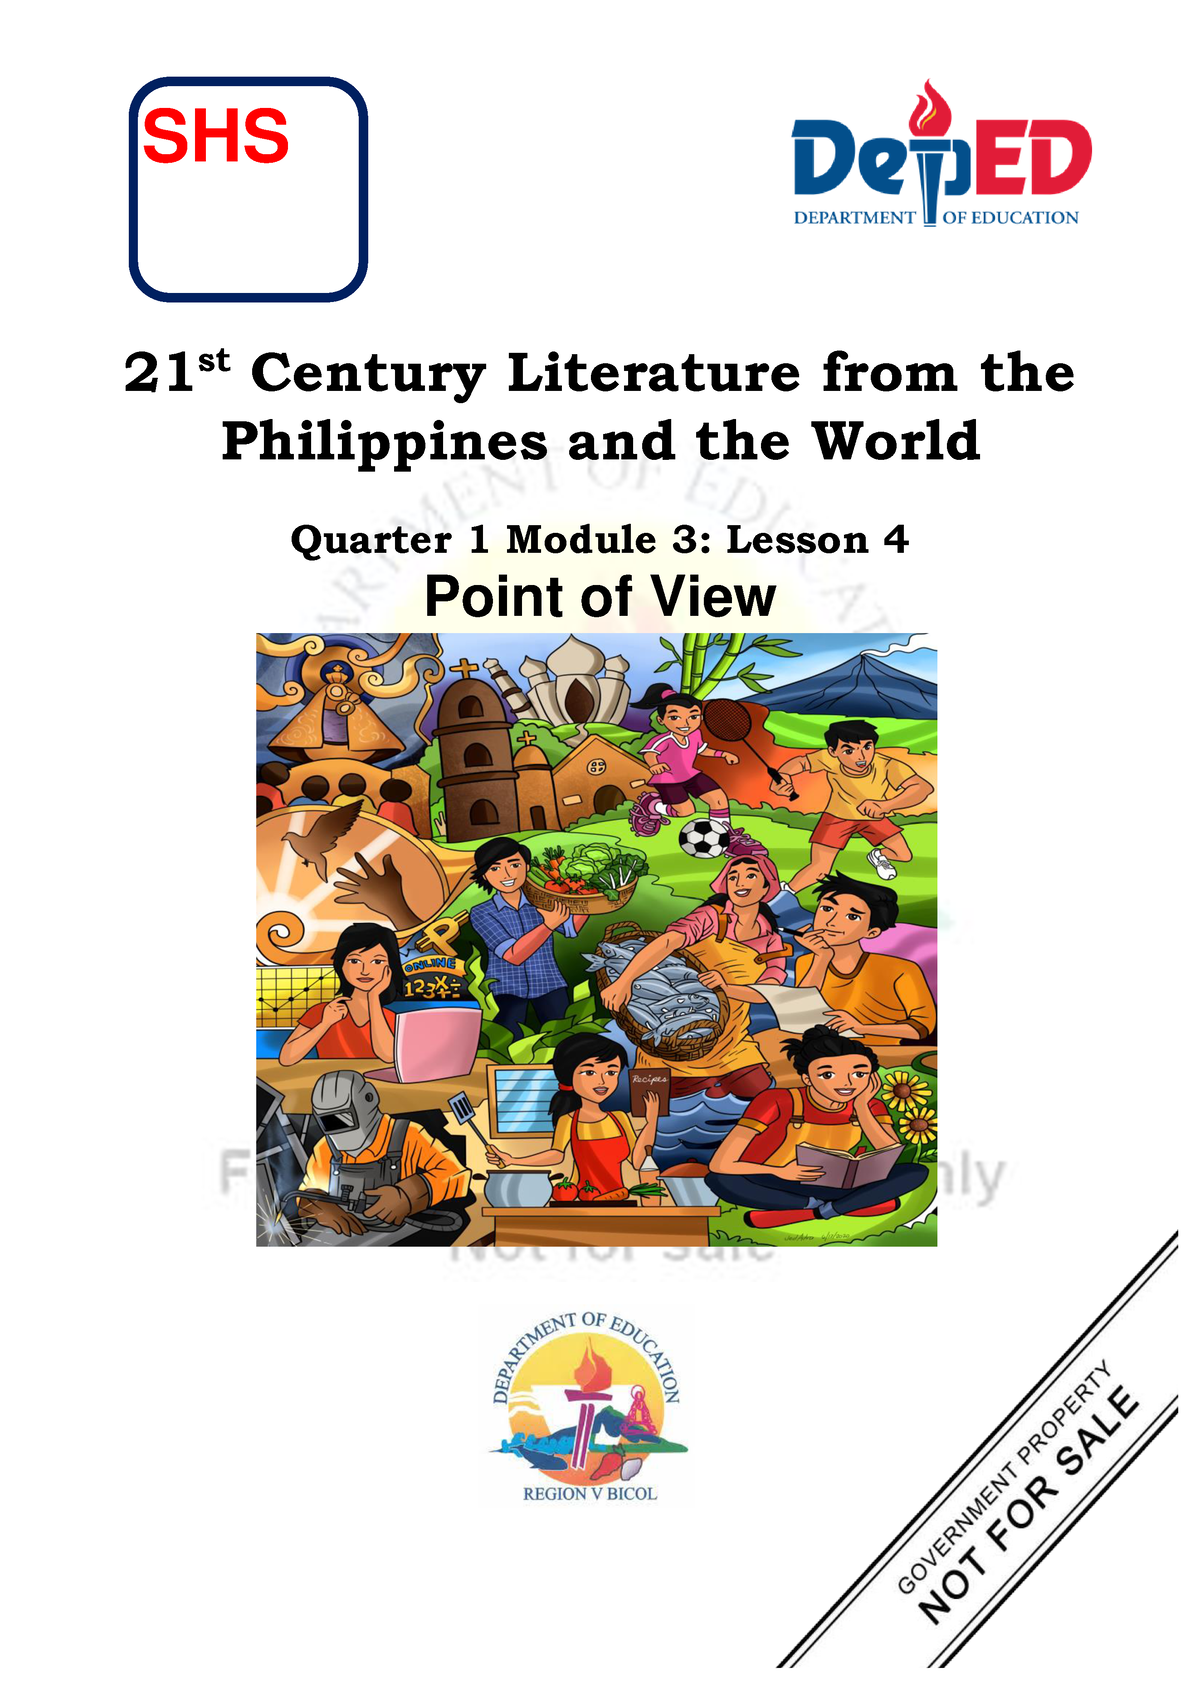 21st CLPW Q1 M3 L4 - NONE - 21 st Century Literature from the ...